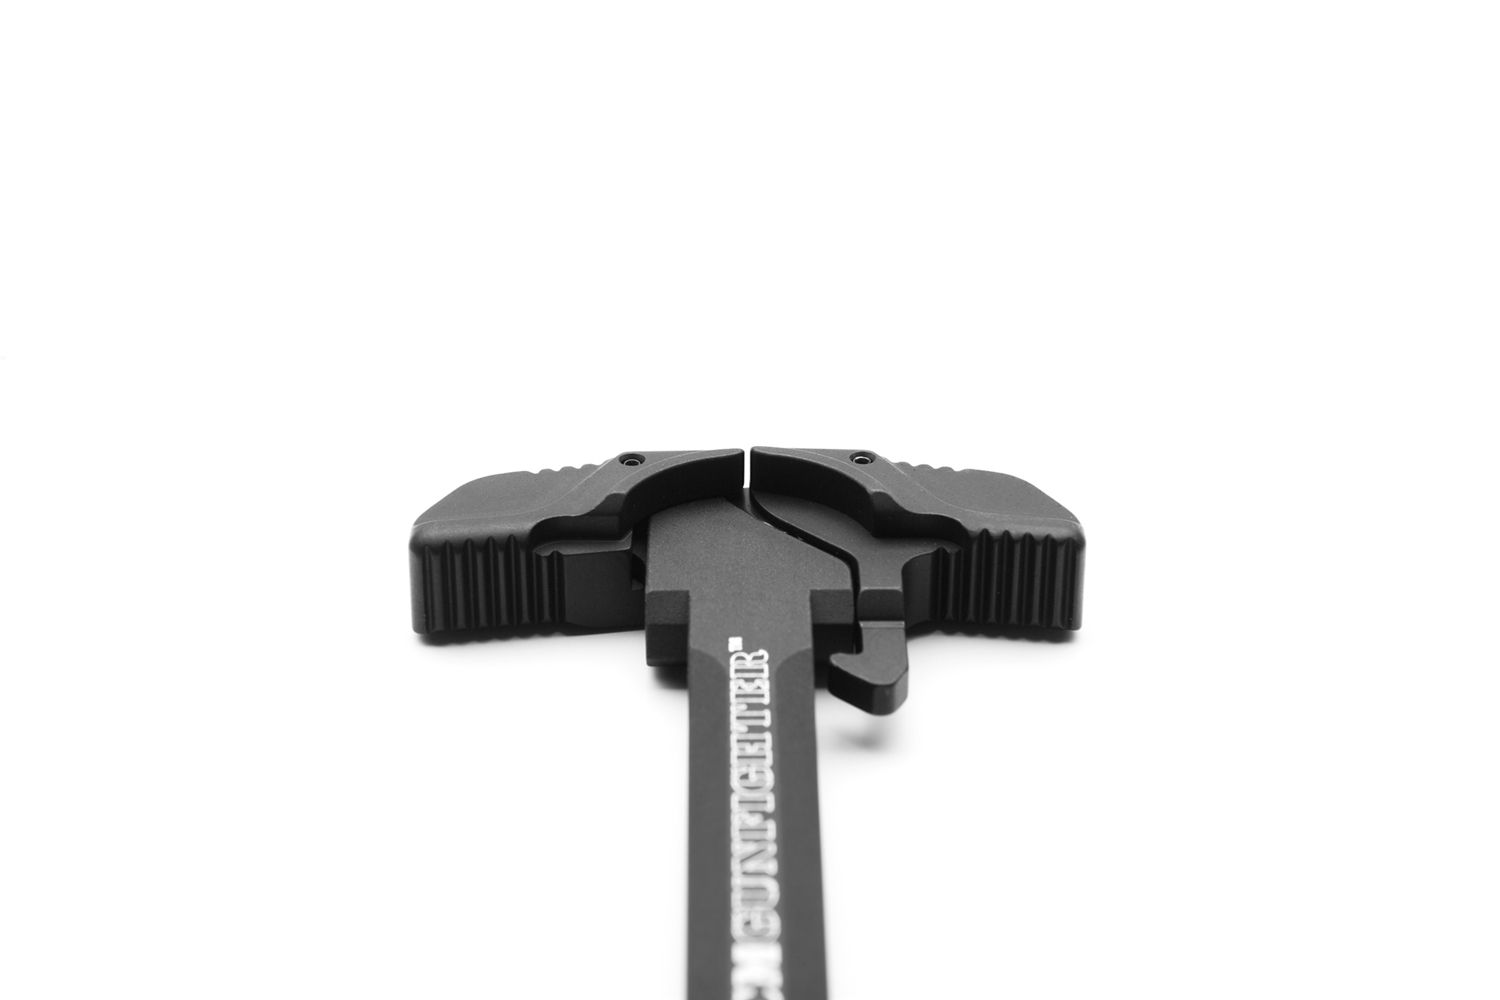 bcm ambi charging handle review